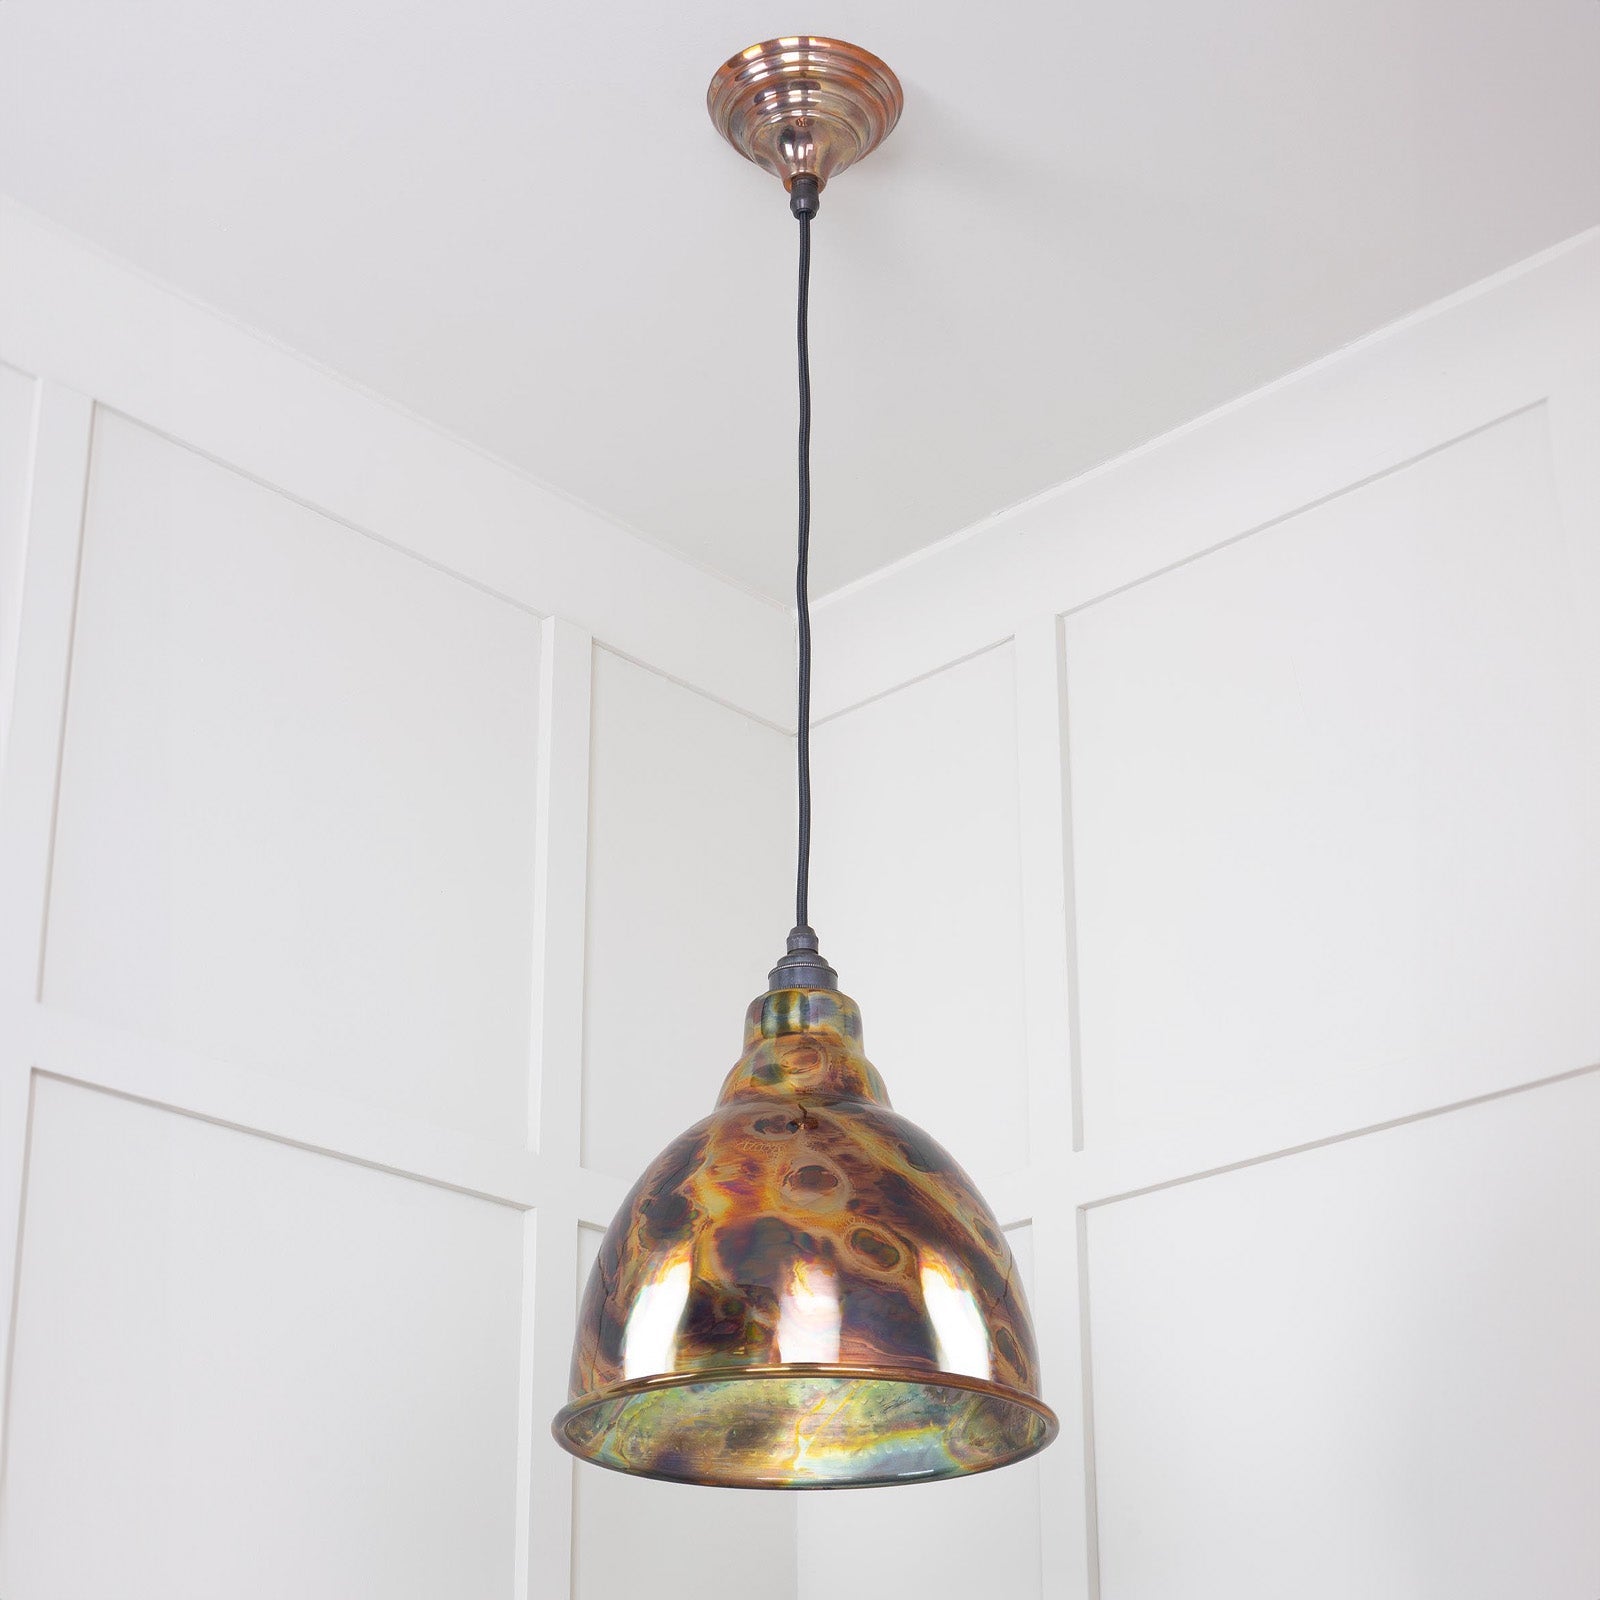 SHOW Full Image of Hanging Brindley Ceiling Light in Burnished Brass